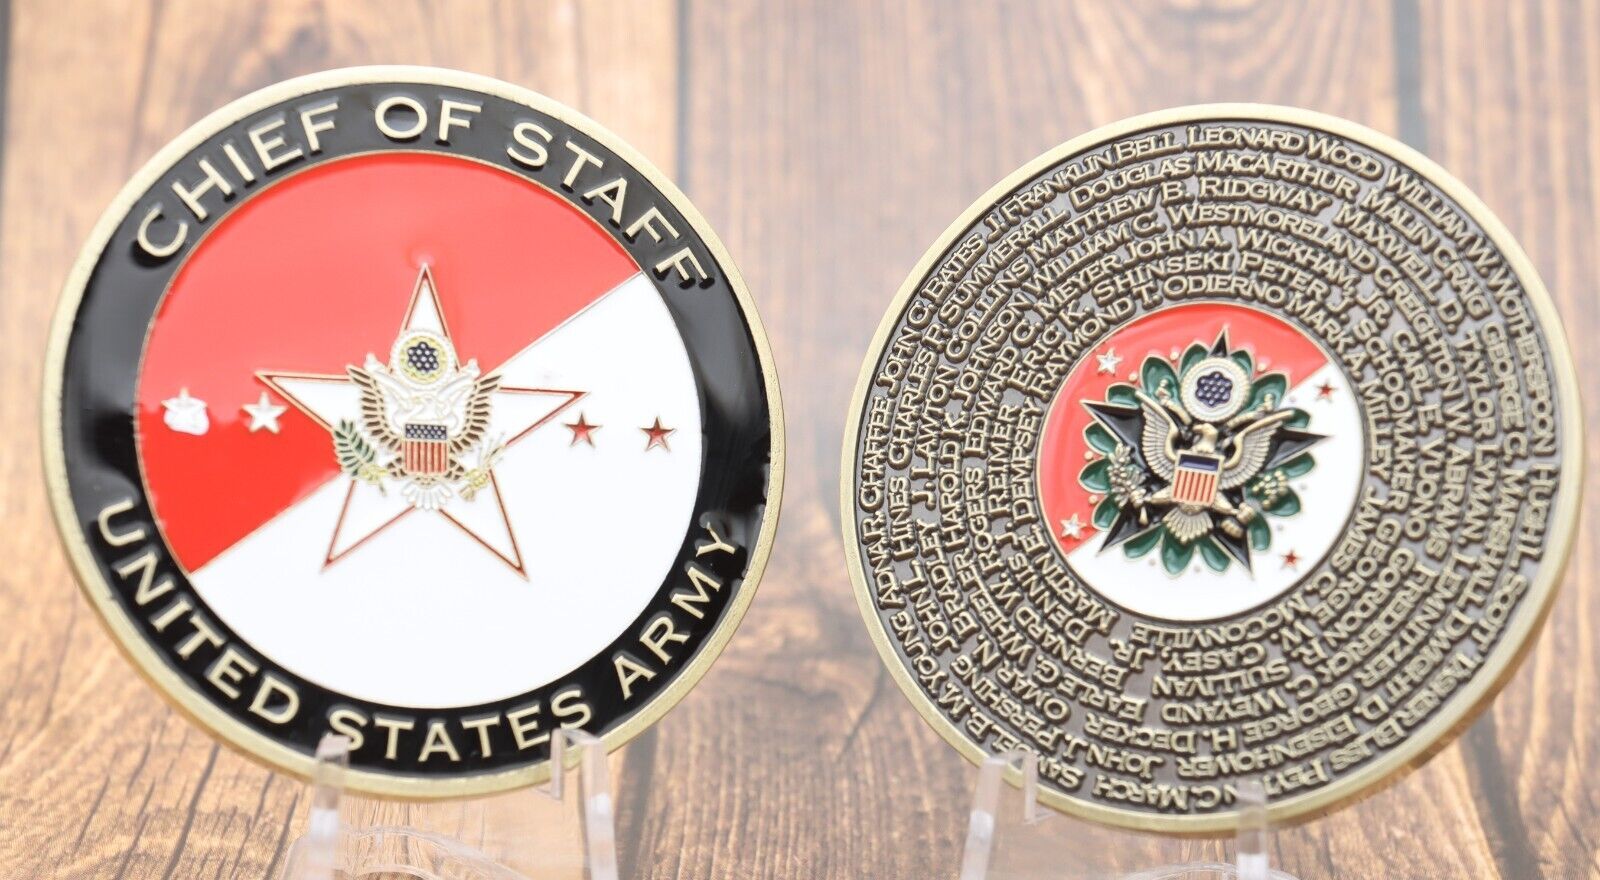 2” History Of The Army Chief of Staff Challenge Coin General CSA AMAZING